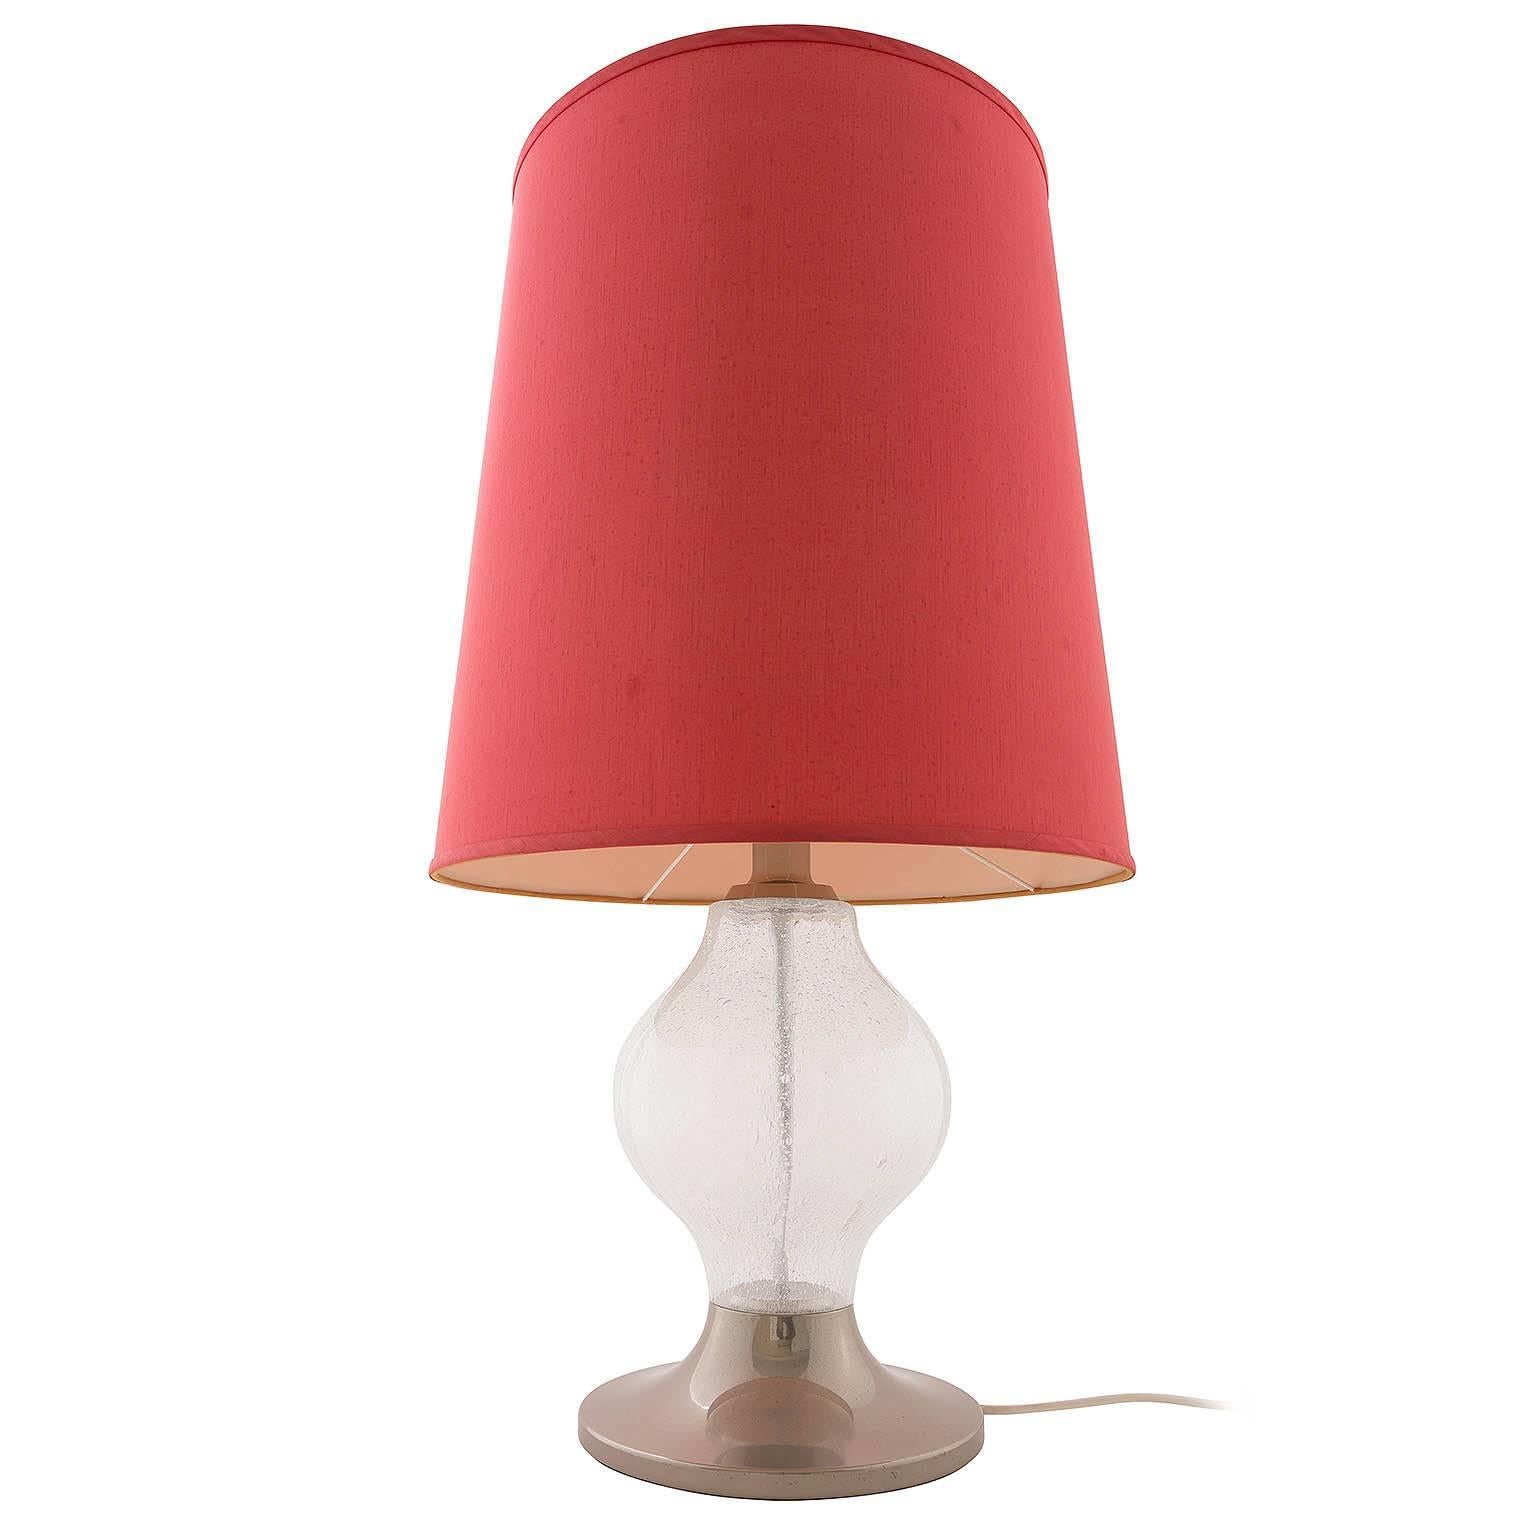 A rare and large 'Tulipan' table or floor lamp by Kalmar, Austria, manufactured in Mid-Century, circa 1970 (late 1960s or early 1970s). 
A nickel-plated base with a large handblown bubble glass. The red lamp shade is in original and very good